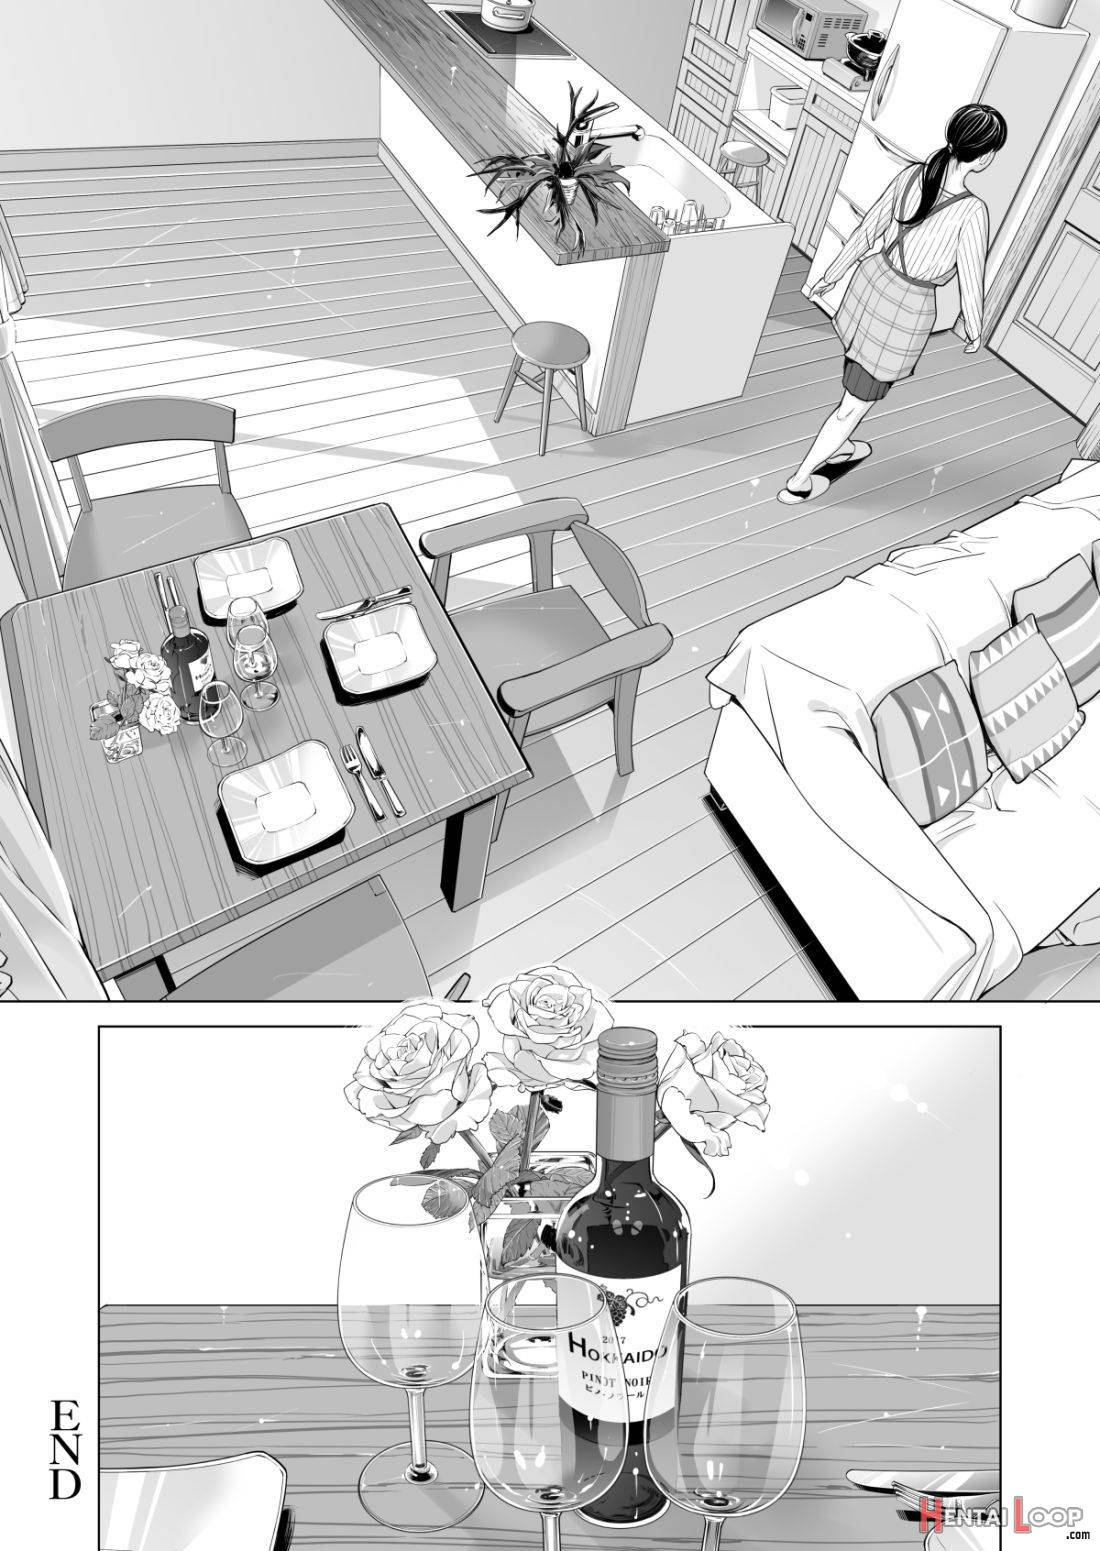 Tsukiyo no Midare Zake (Kouhen) Moonlit Intoxication ~ A Housewife Stolen by a Coworker Besides her Blackout Drunk Husband ~ Chapter 2 page 71